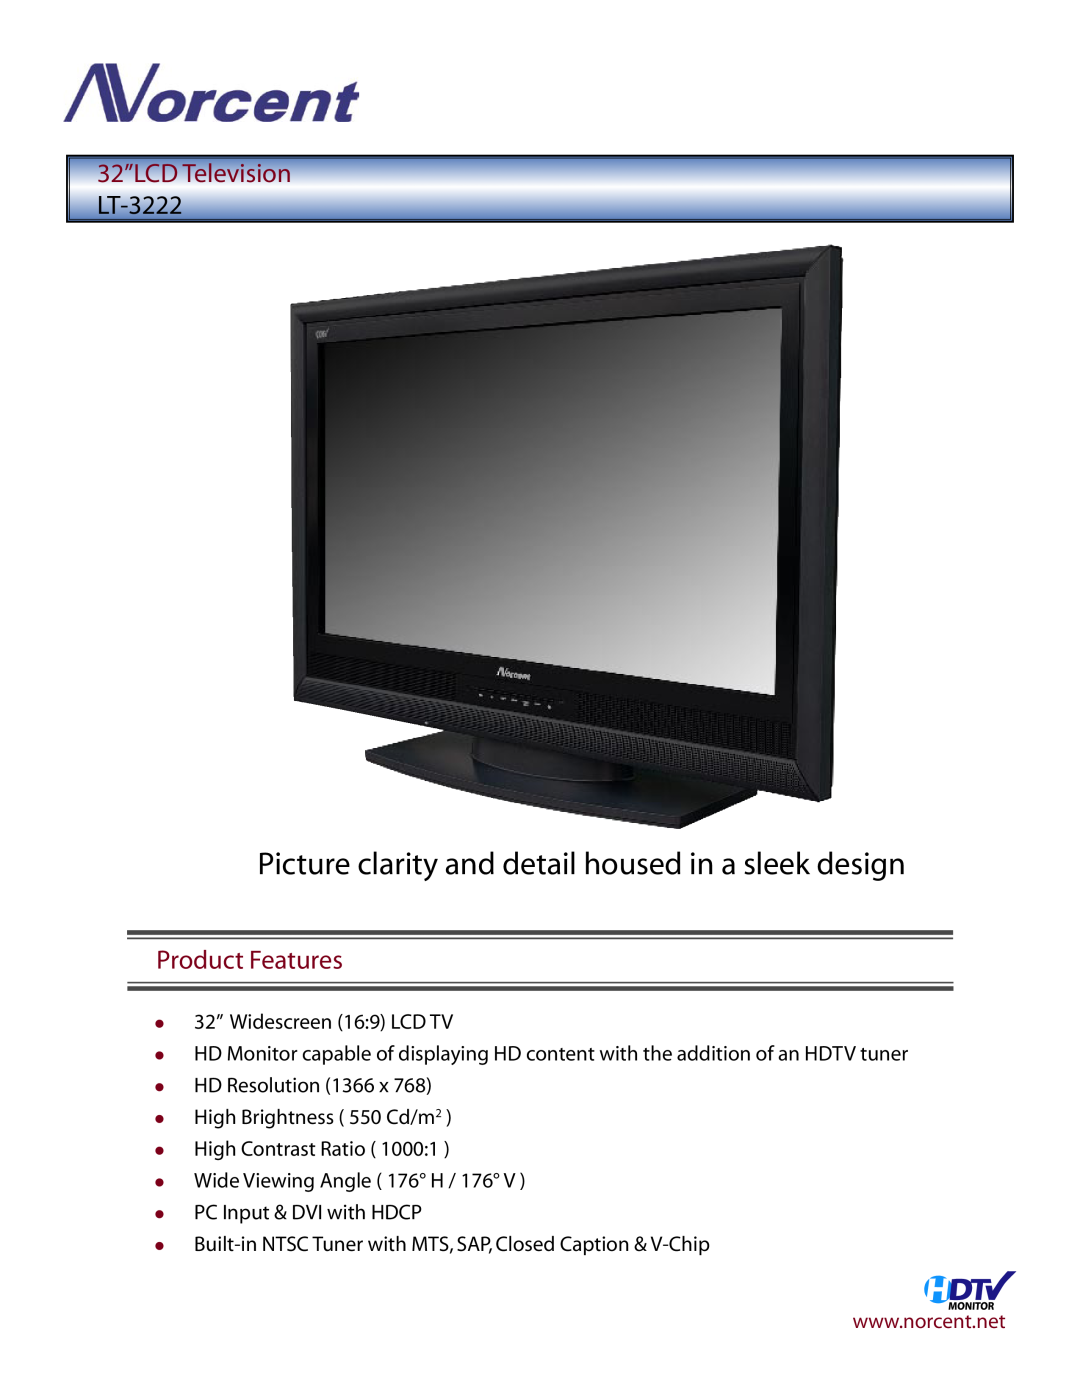 Norcent Technologies manual 32”LCD Television LT-3222, Picture clarity and detail housed in a sleek design 